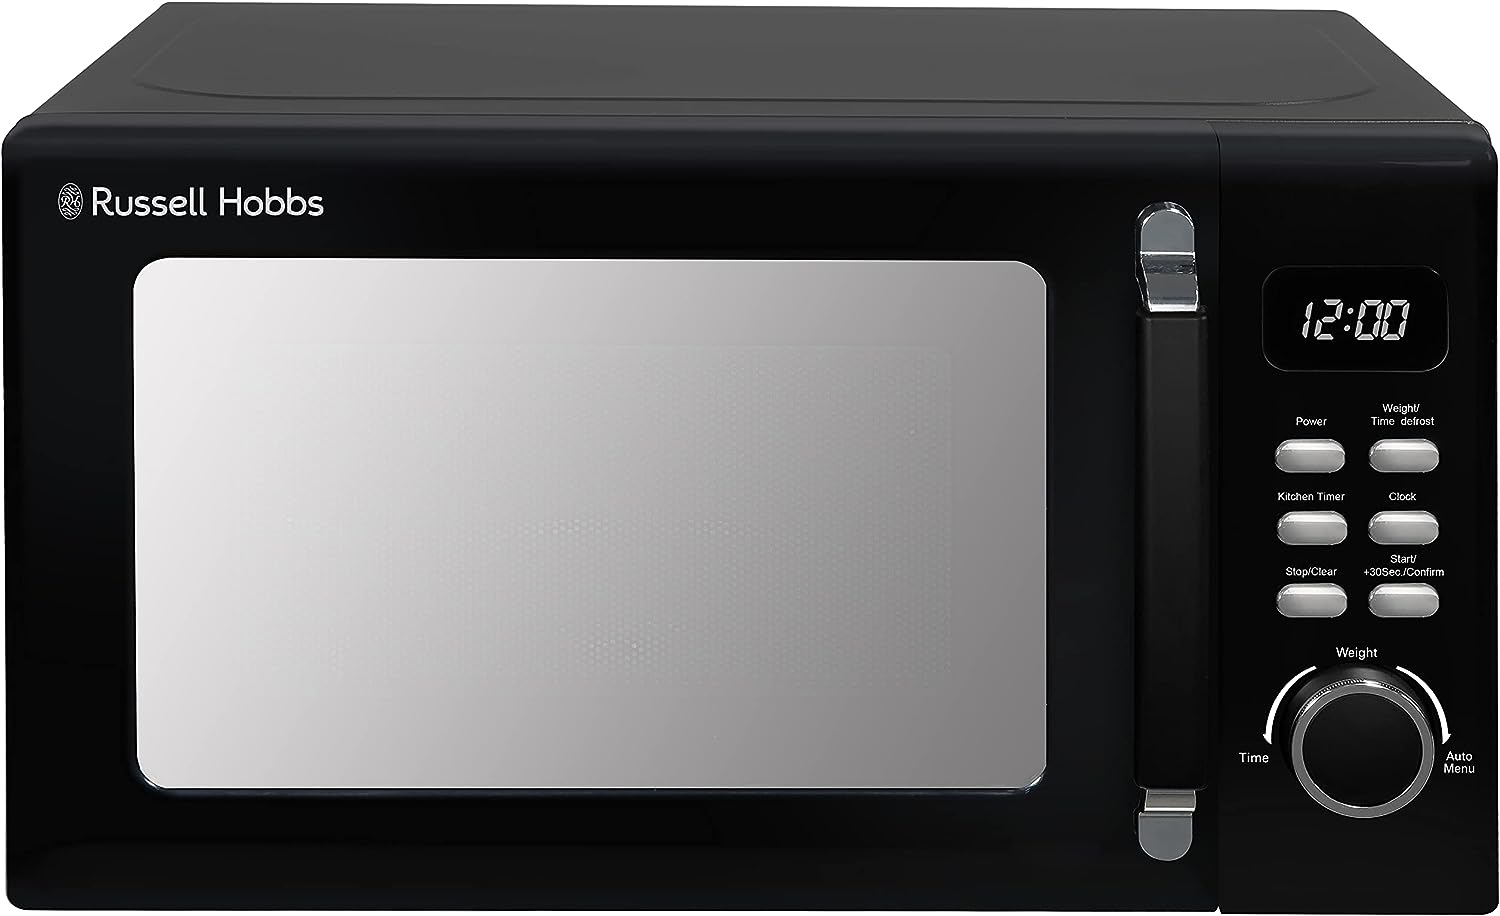 Russell Hobbs RHM2026B STYLEVIA 20 Litre 800 W Black Digital Microwave, 5 Power Levels, High Gloss Finish, 8 Automatic Cooking Settings